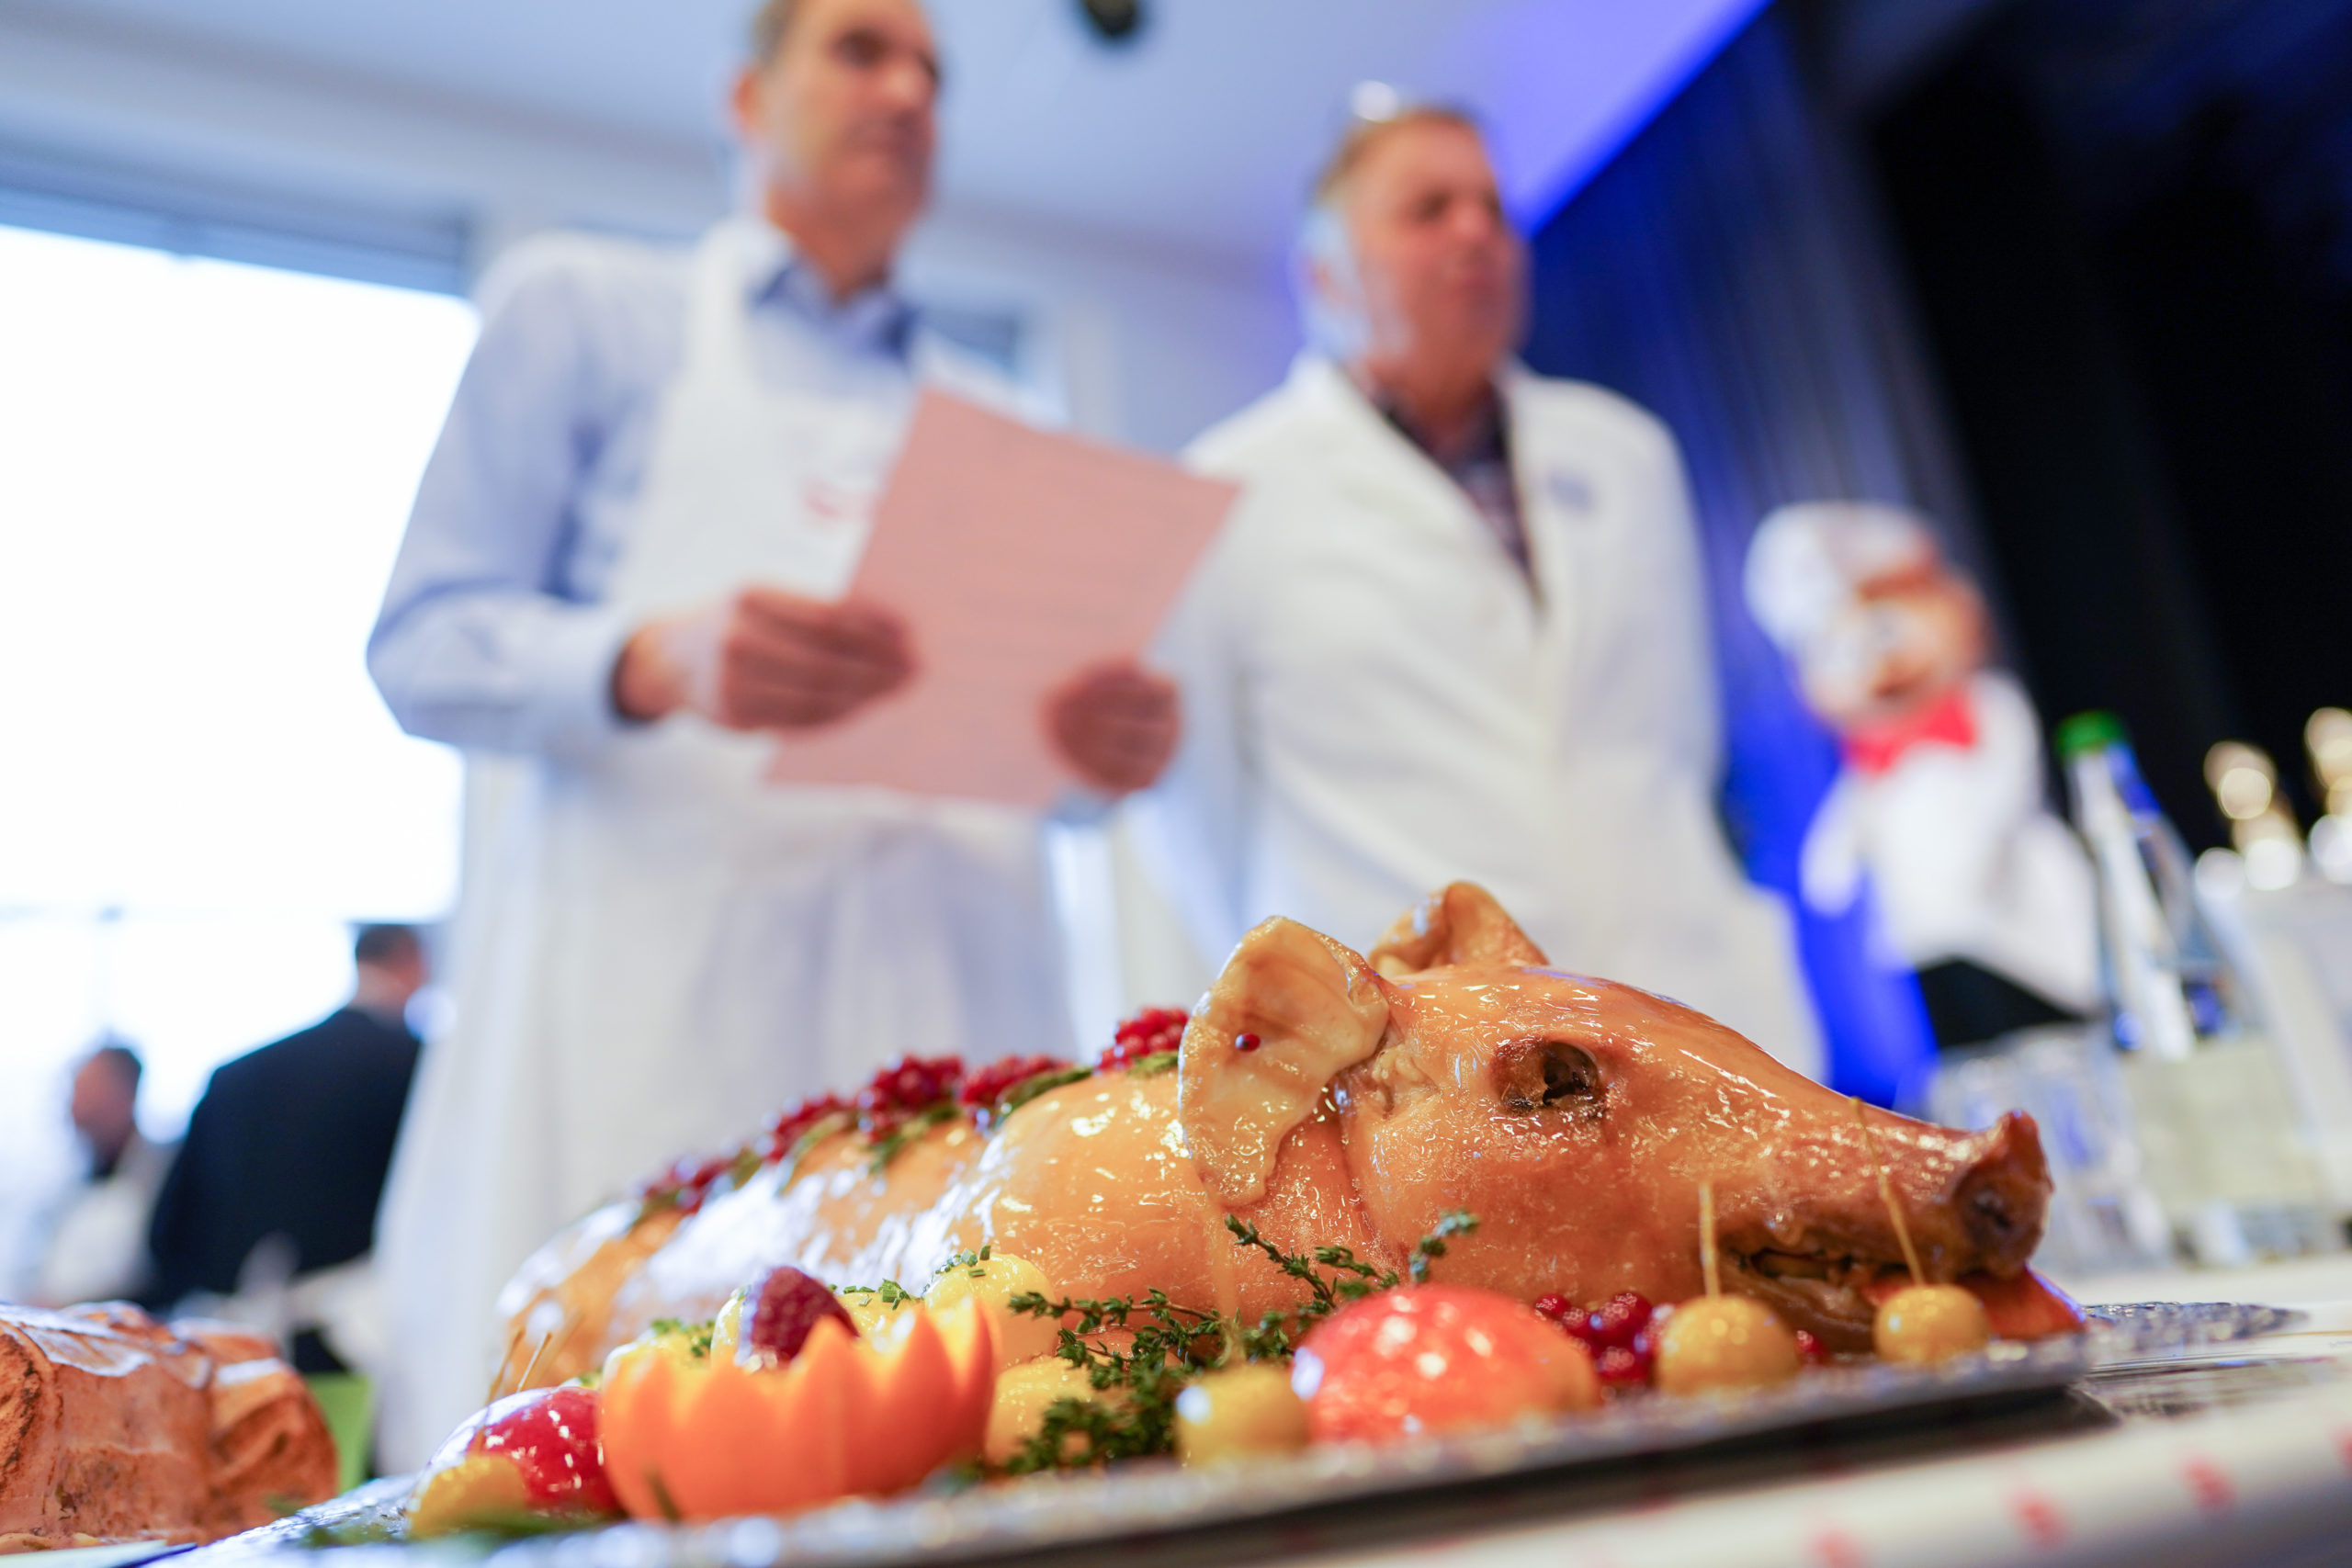 Judges examine a pig-shaped Saumagen at a Saumagen cooking competition in Herxheim